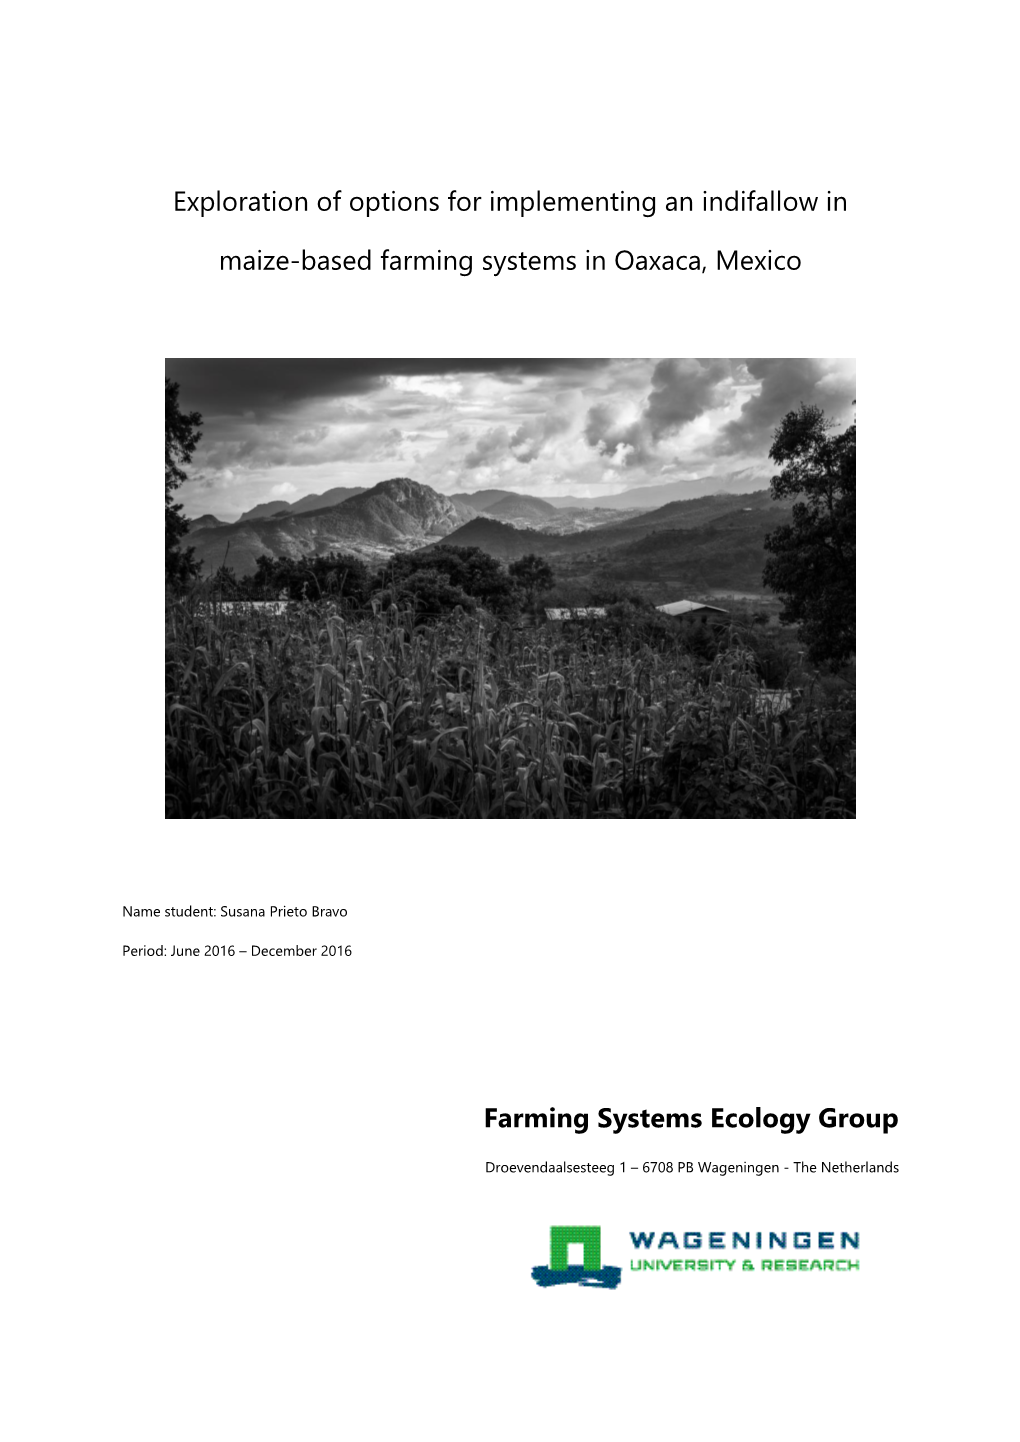 Exploration of Options for Implementing an Indifallow in Maize-Based Farming Systems in Oaxaca, Mexico